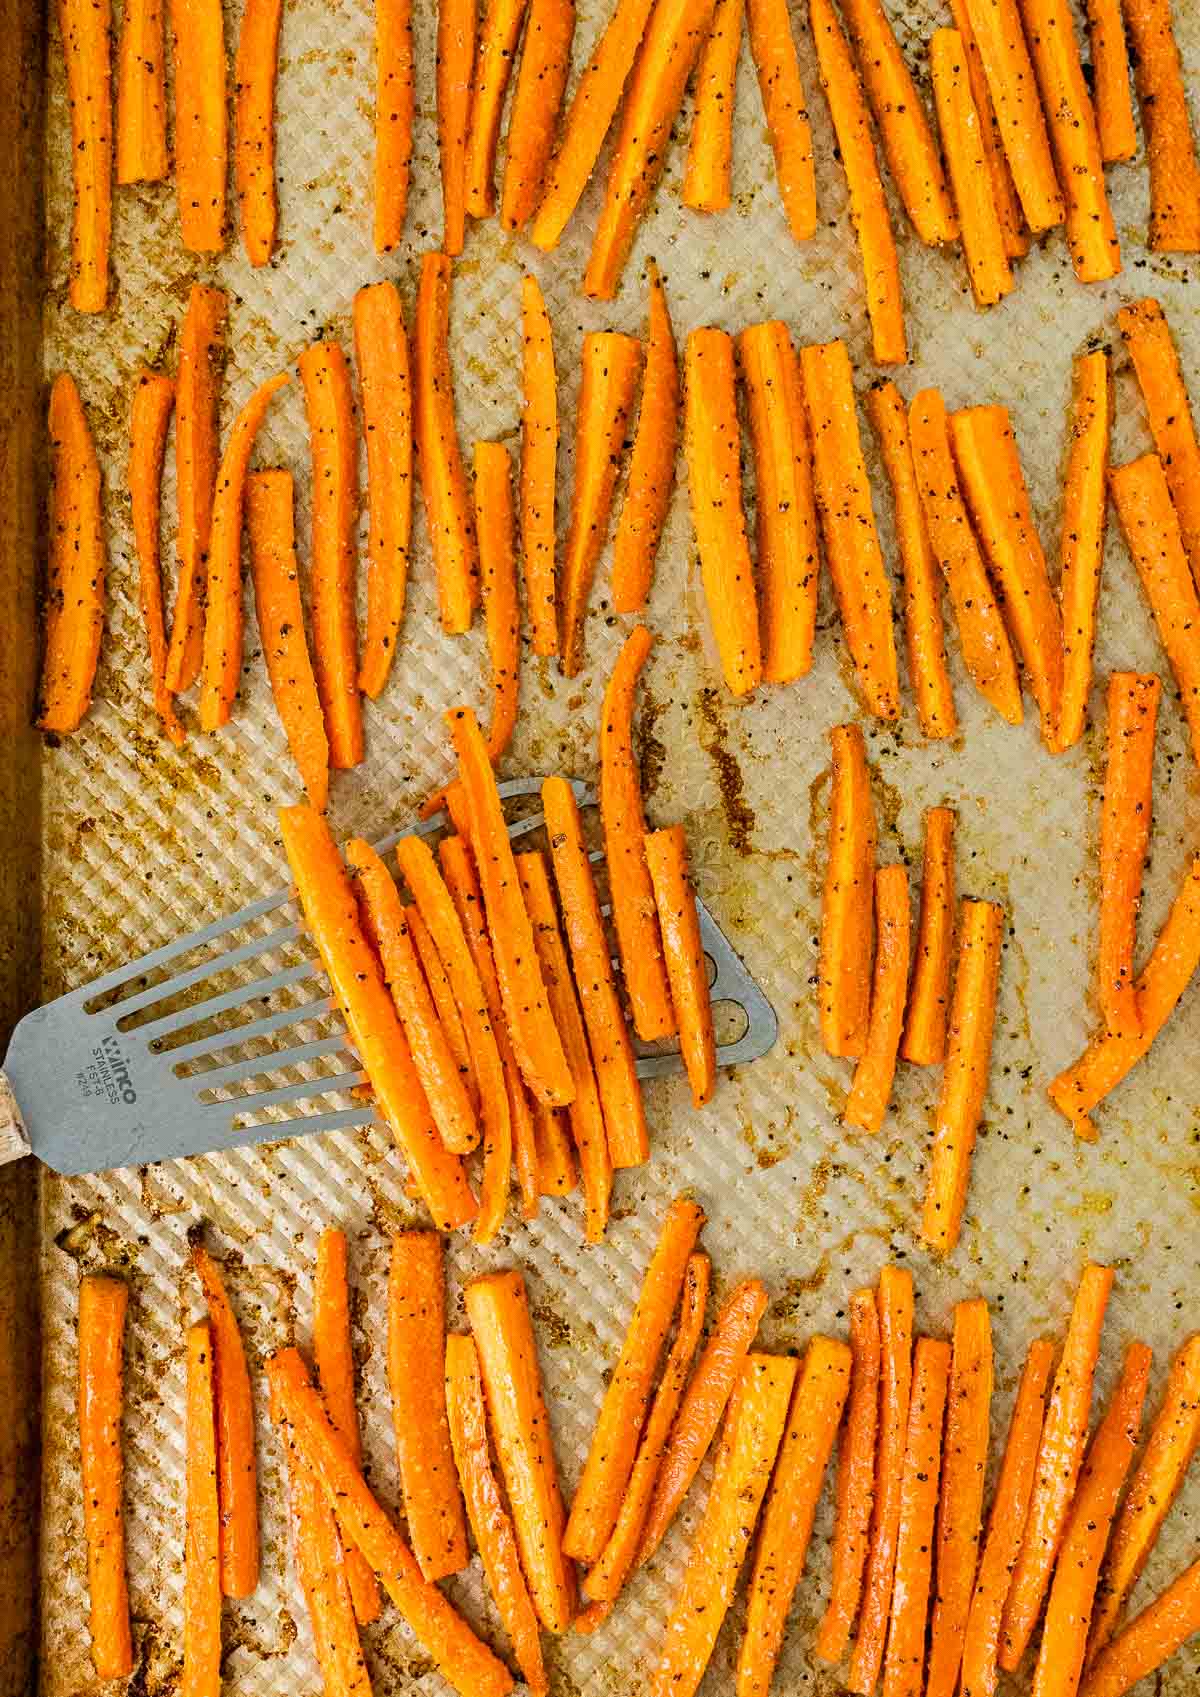 Roasted Carrot Fries, cooked on the baking sheet